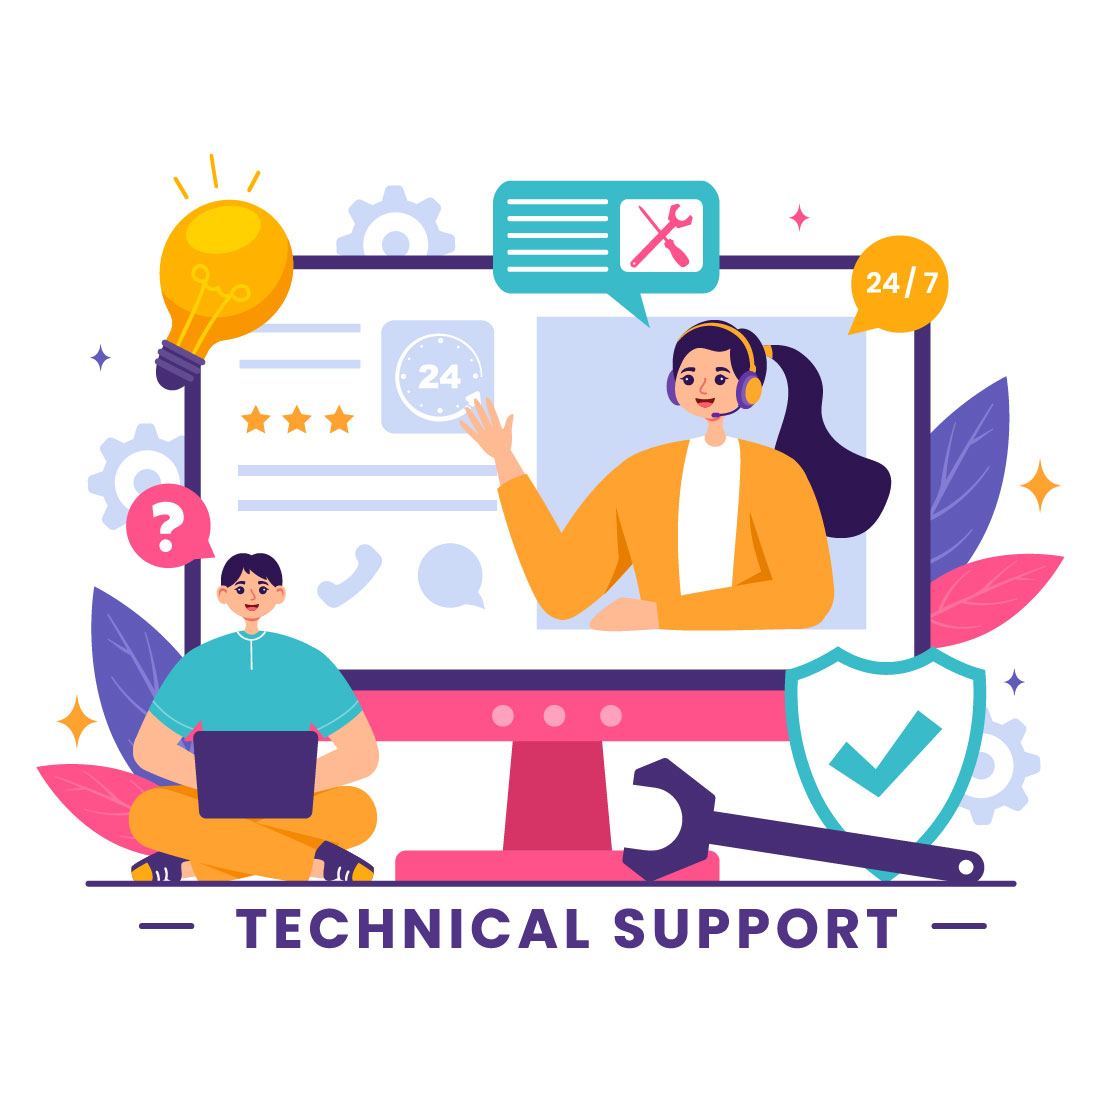 13 Technical Support System Illustration cover image.